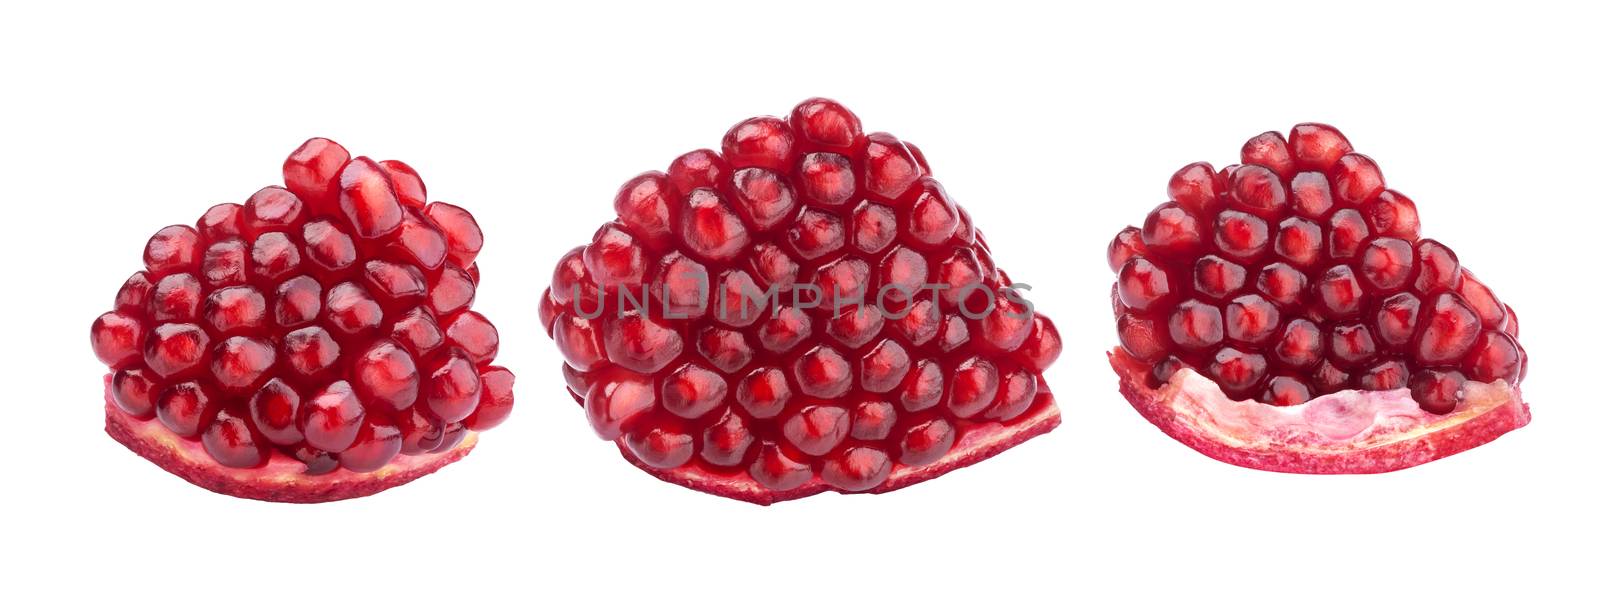 Ripe pomegranate segments isolated on white with clipping path